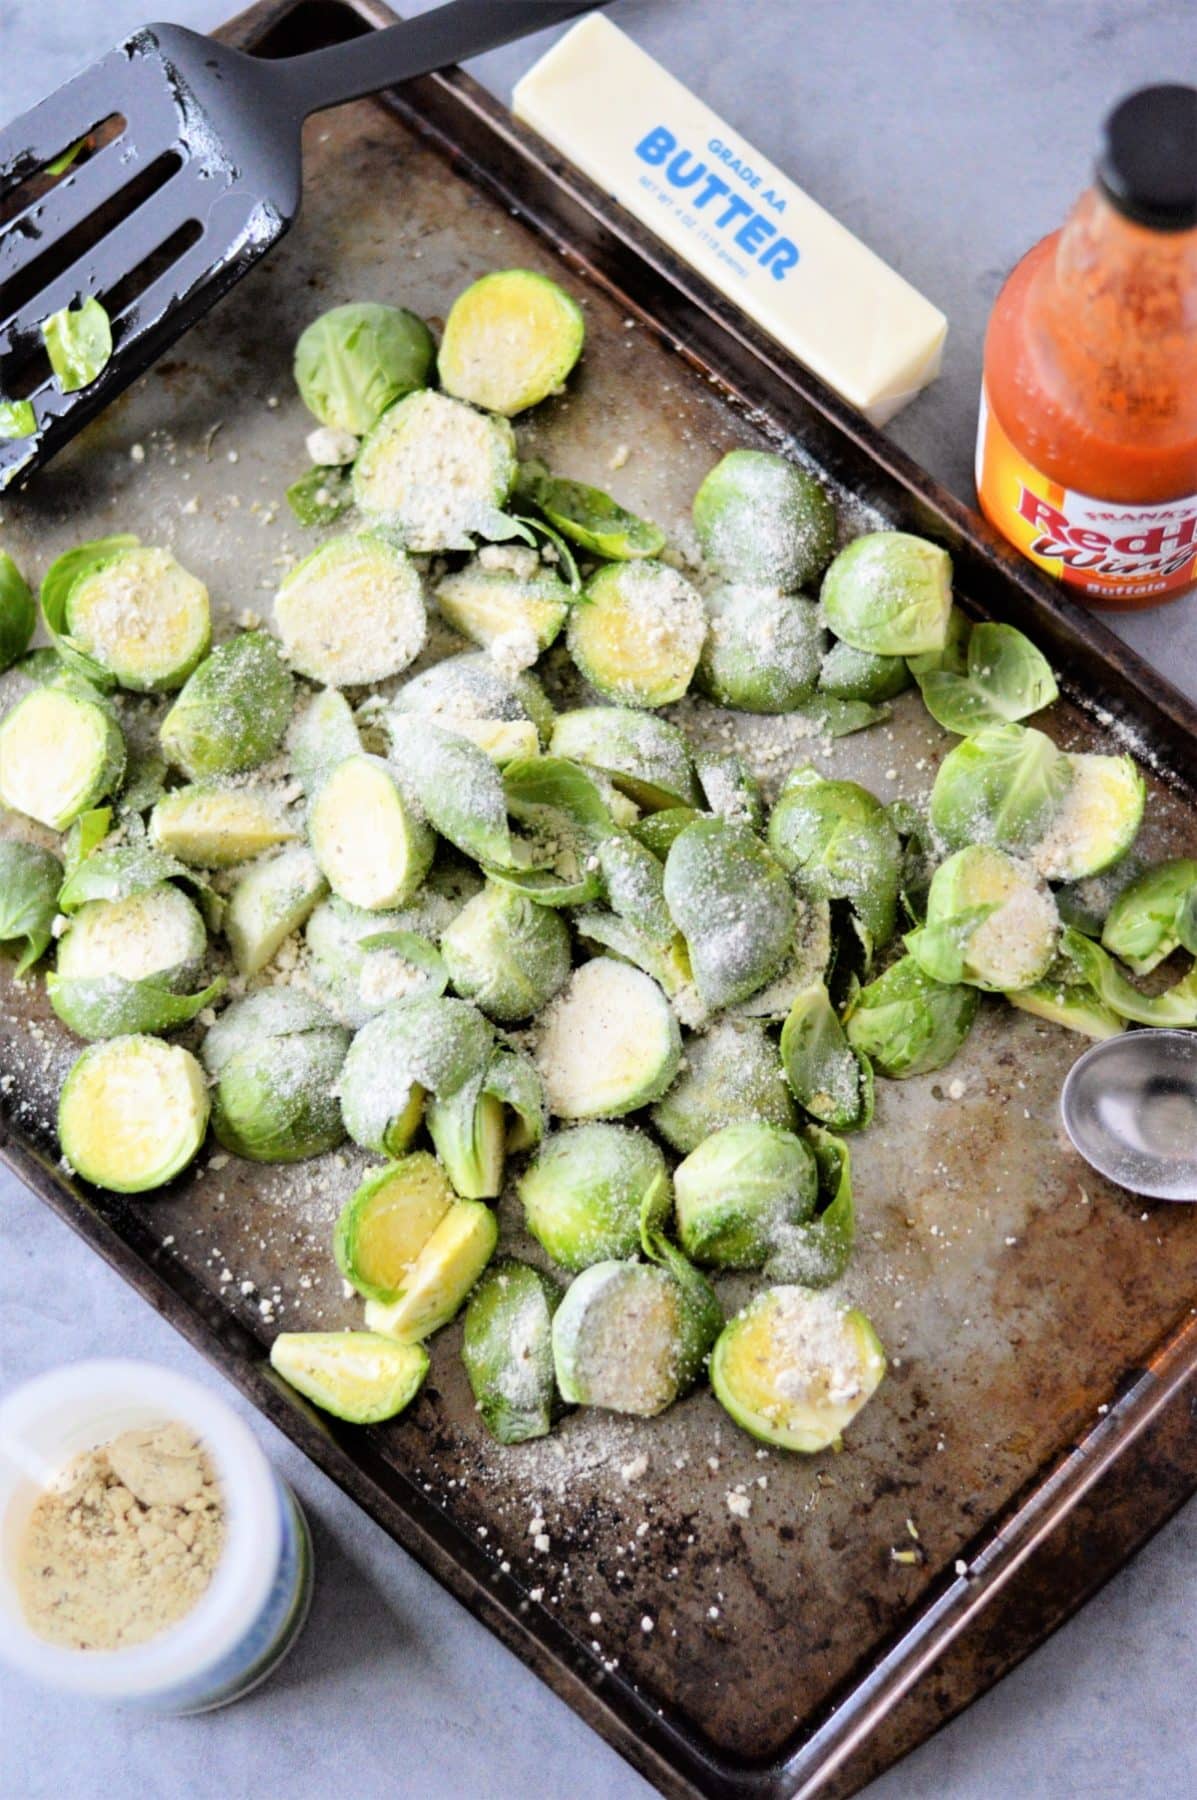 Raw brussels sprouts on a baking sheet with oil and seasoning sprinkled on